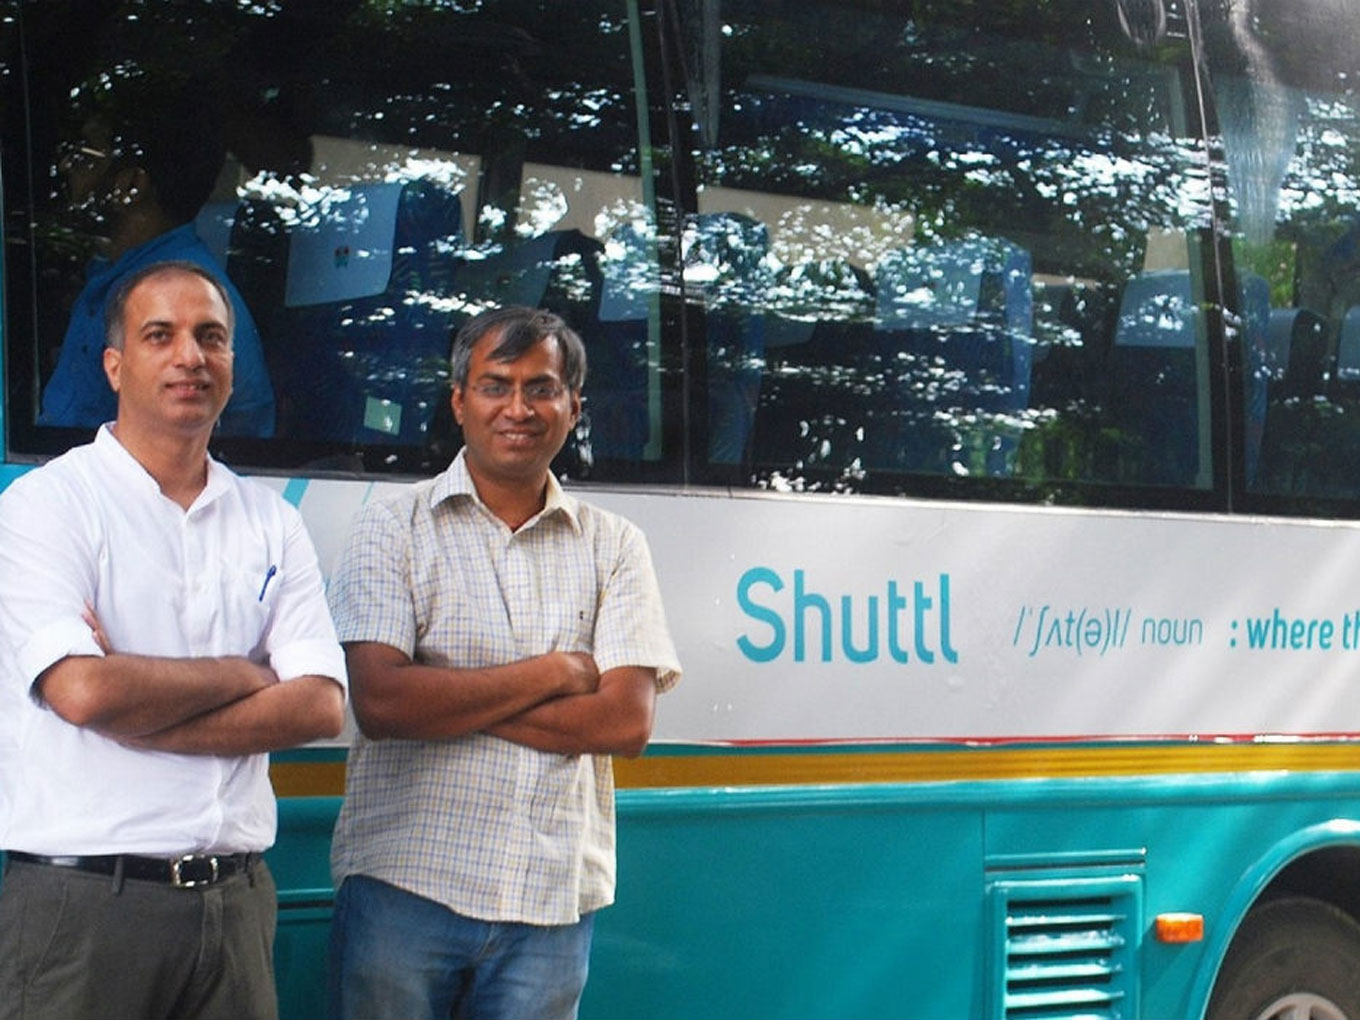 In An Online World, Shuttl Offers An Offline, Convenient Meal Service On Its Buses. Here’s Why